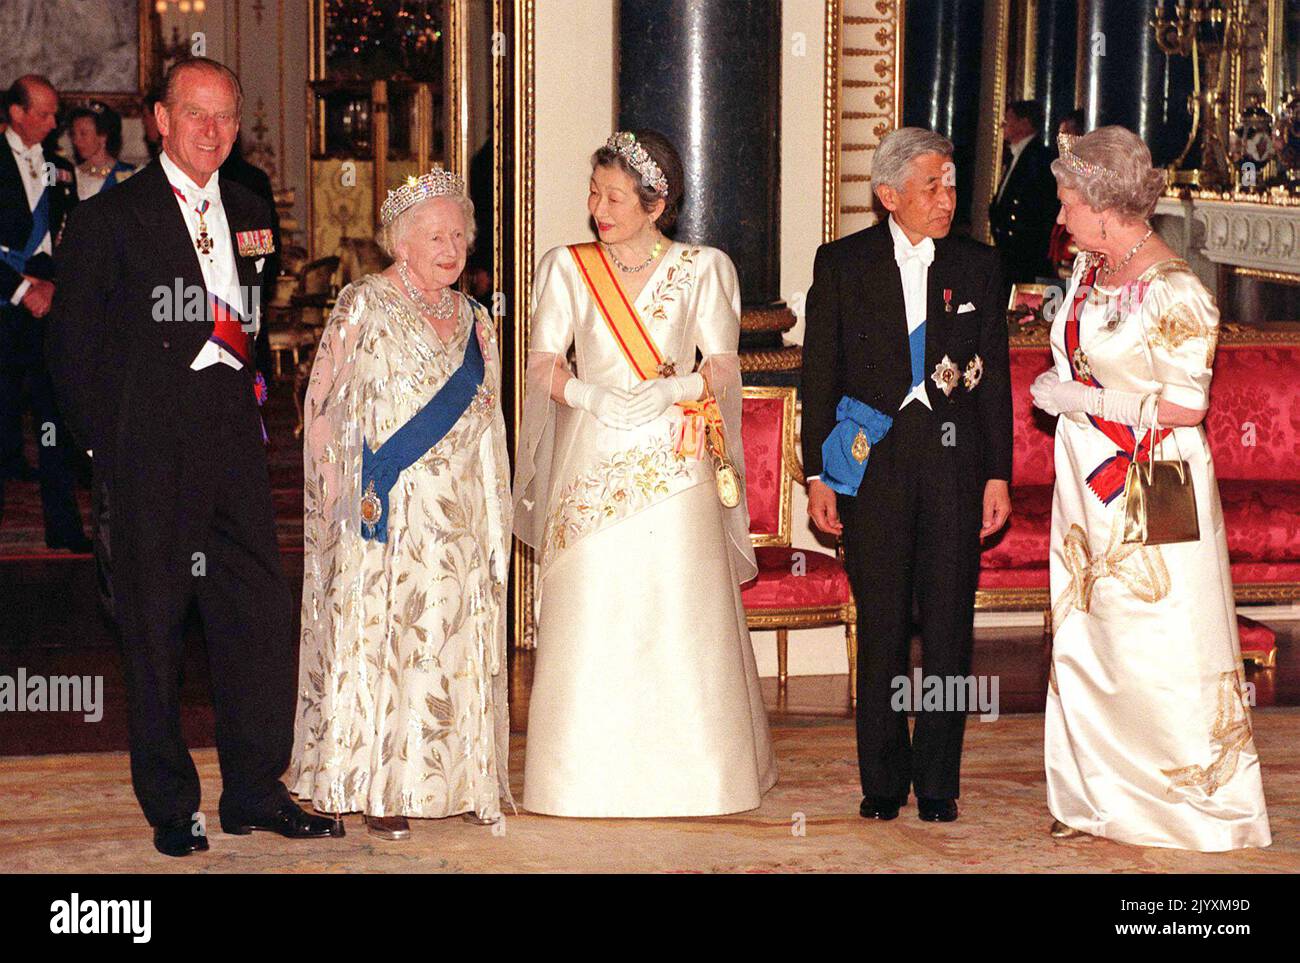 File photo dated 26/5/1998 of Queen Elizabeth II (right) and Japanese Emperor Akihito (second right), his wife Empress Michiko (centre), the Duke of Edinburgh (left) and Queen Elizabeth, The Queen Mother pausing for photographers as they arrive at the State Banquet Hall in Buckingham Palace. The Queen's relationship with her mother helped fashion the monarchy, and while devastated by her death, friends acknowledged that in the years that followed the Queen 'came into her own'. Issue date: Thursday September 8, 2022. Stock Photo